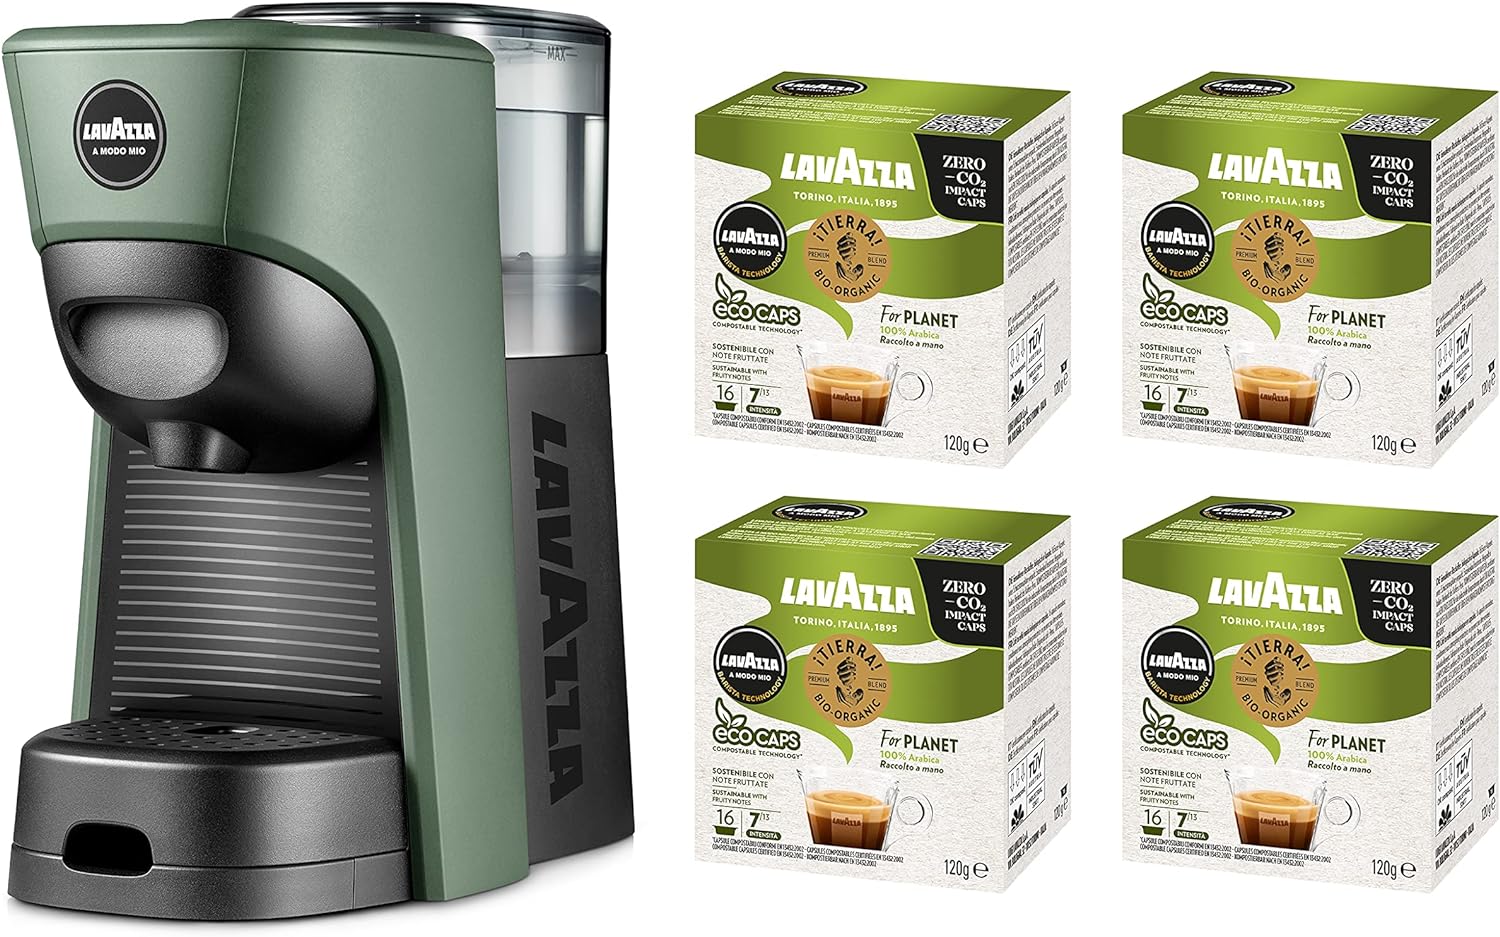 Lavazza, A Modo Mio Tiny Eco Green Coffee Machine With 64 Capsules ¡Tierra! For planet included, espresso machine made of recycled plastic, 1450 W, 220-240 V, 50/60 Hz, 0.6 Litres